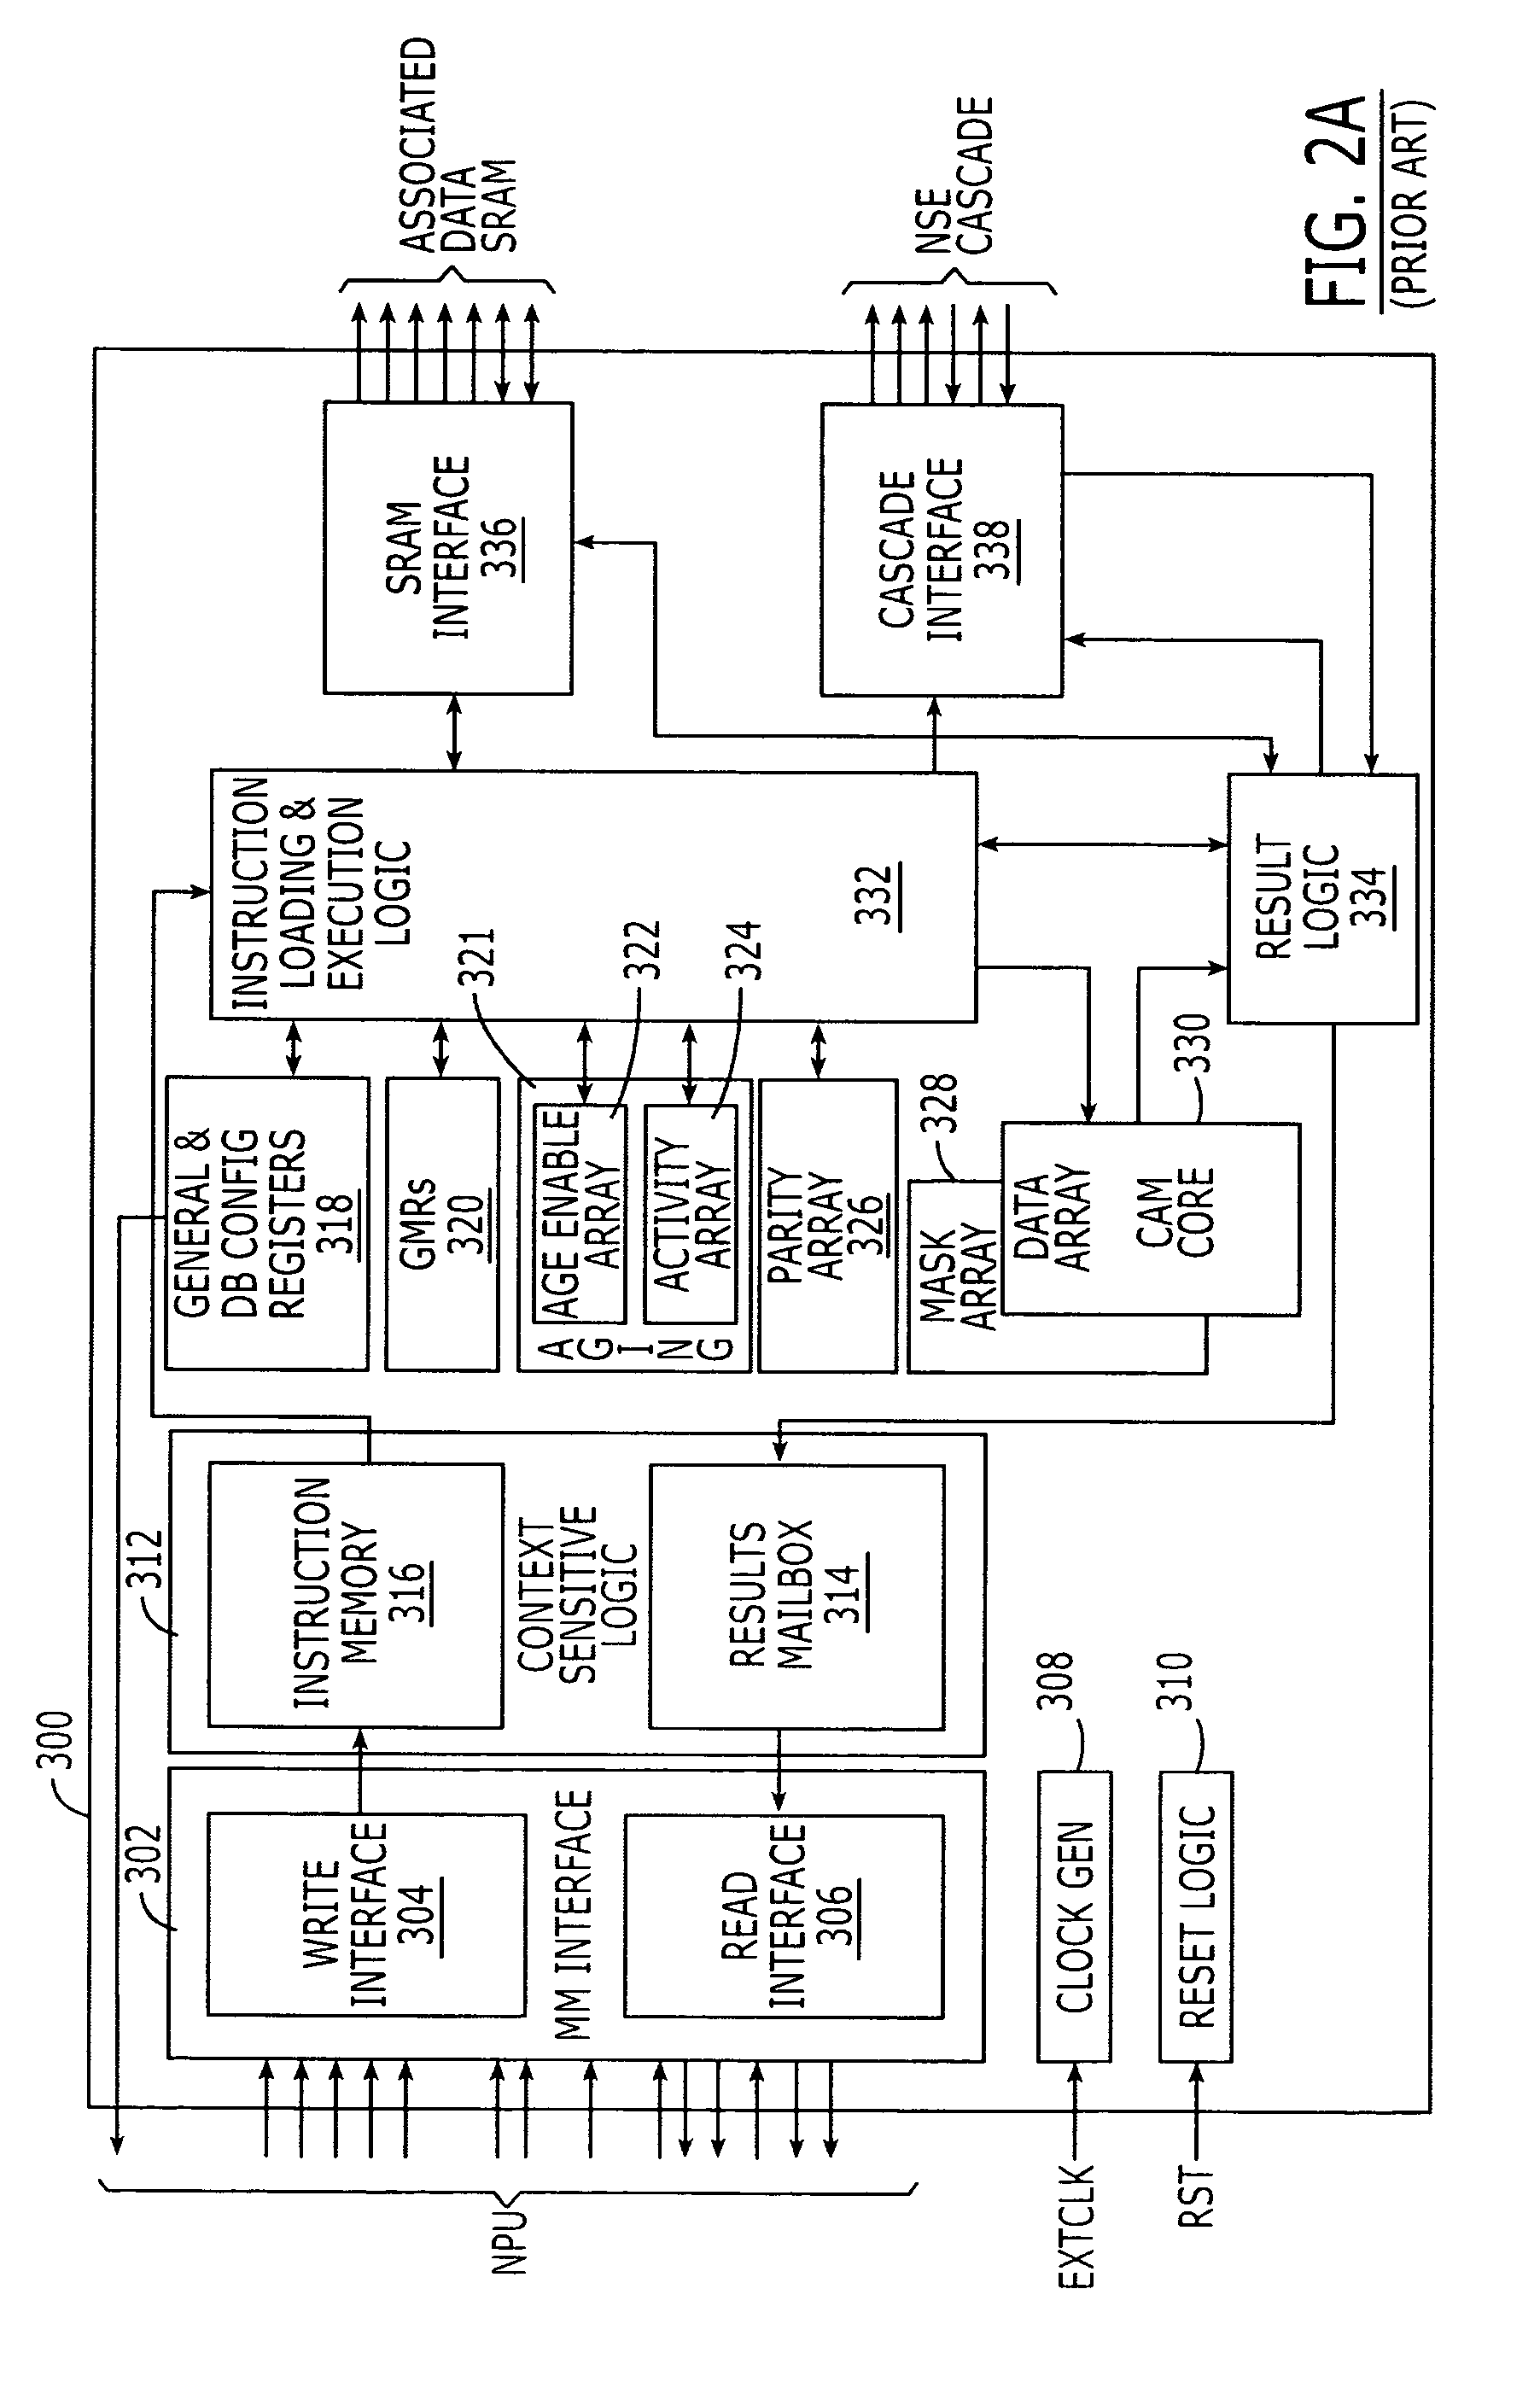 CAM-based search engine devices having index translation capability